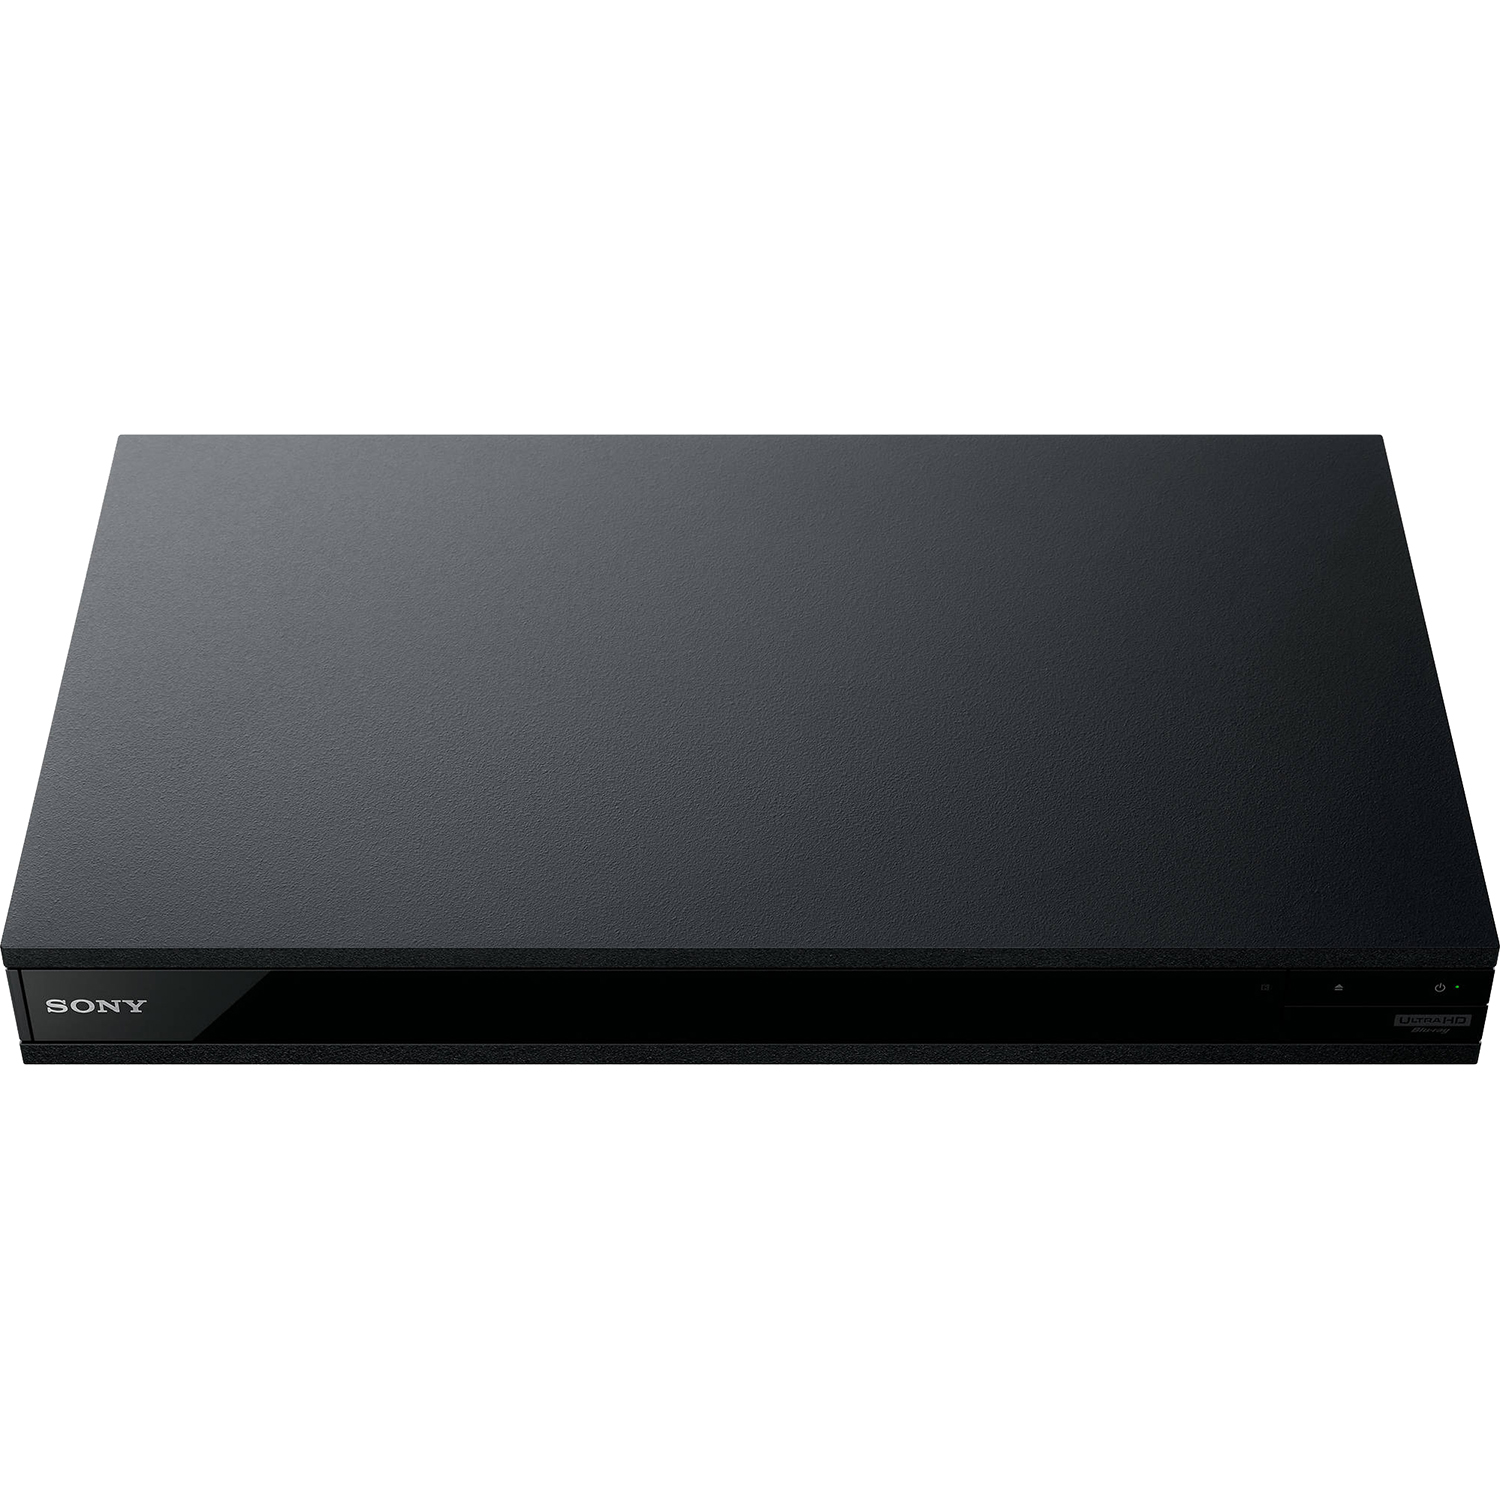 Photos - DVD / Blu-ray Player Sony UBP-X800M2 4K UHD Blu-ray Player With HDR and Dolby Atmos 